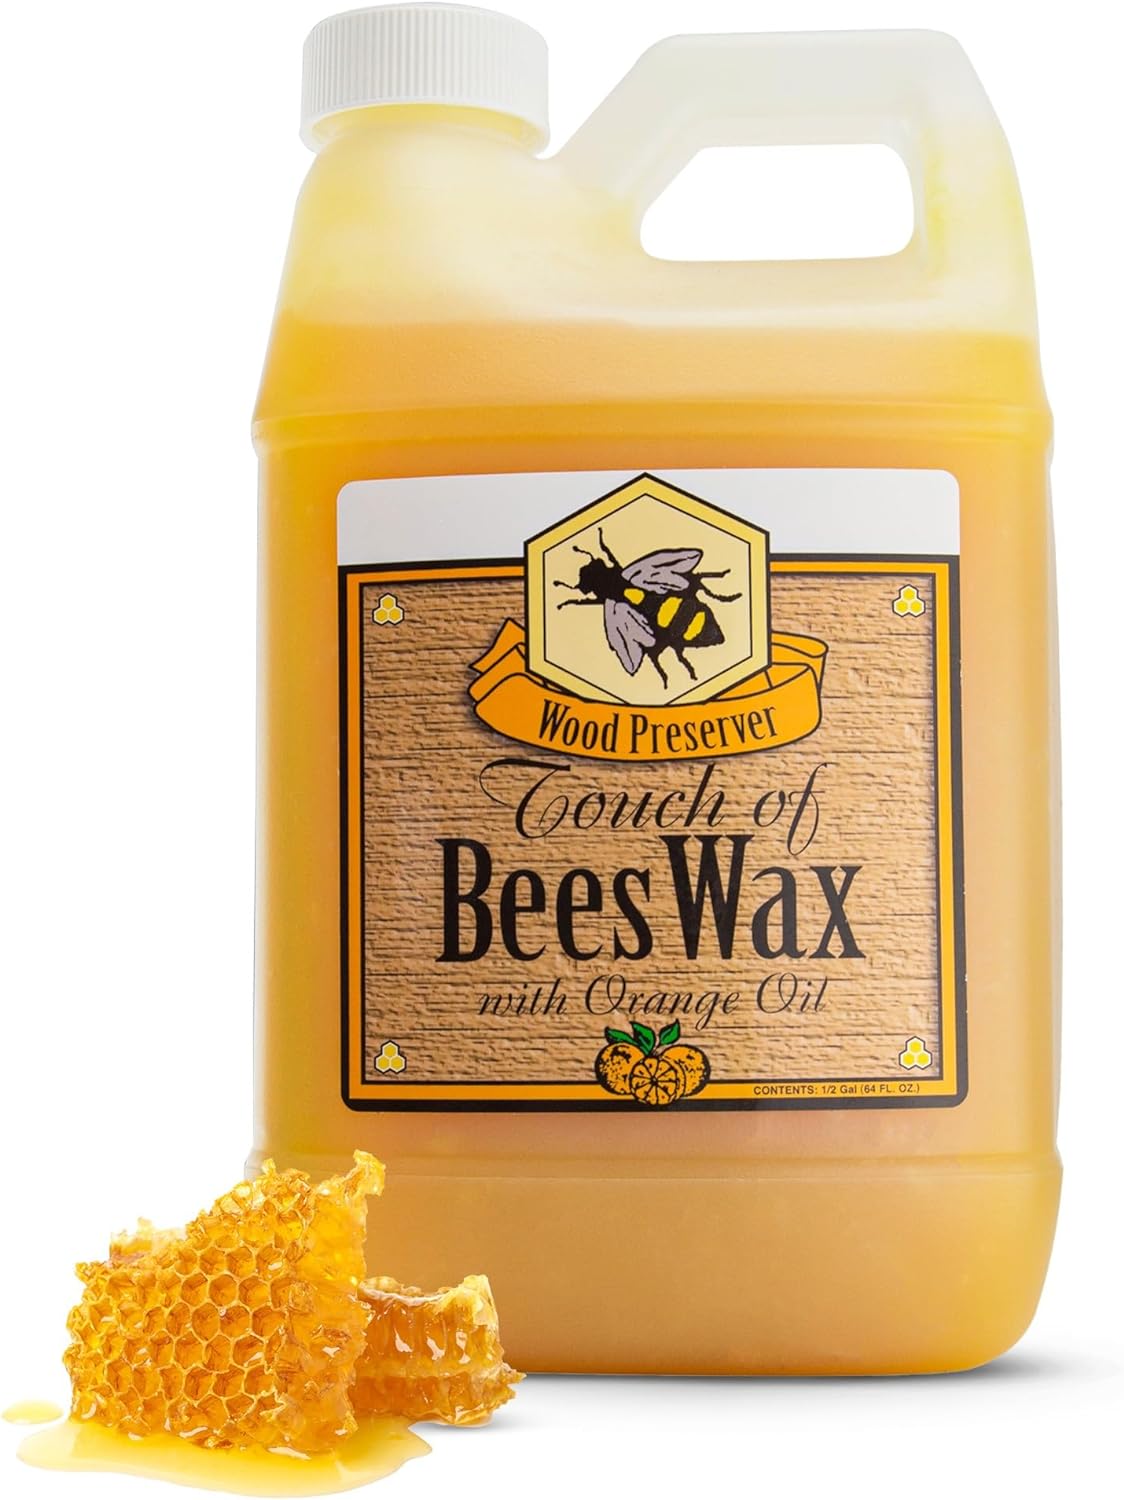 Touch of Beeswax Wood Furniture Polish and Conditioner with Orange Oil. Feeds, Waxes and Preserves Wood Beautifully (64 oz)